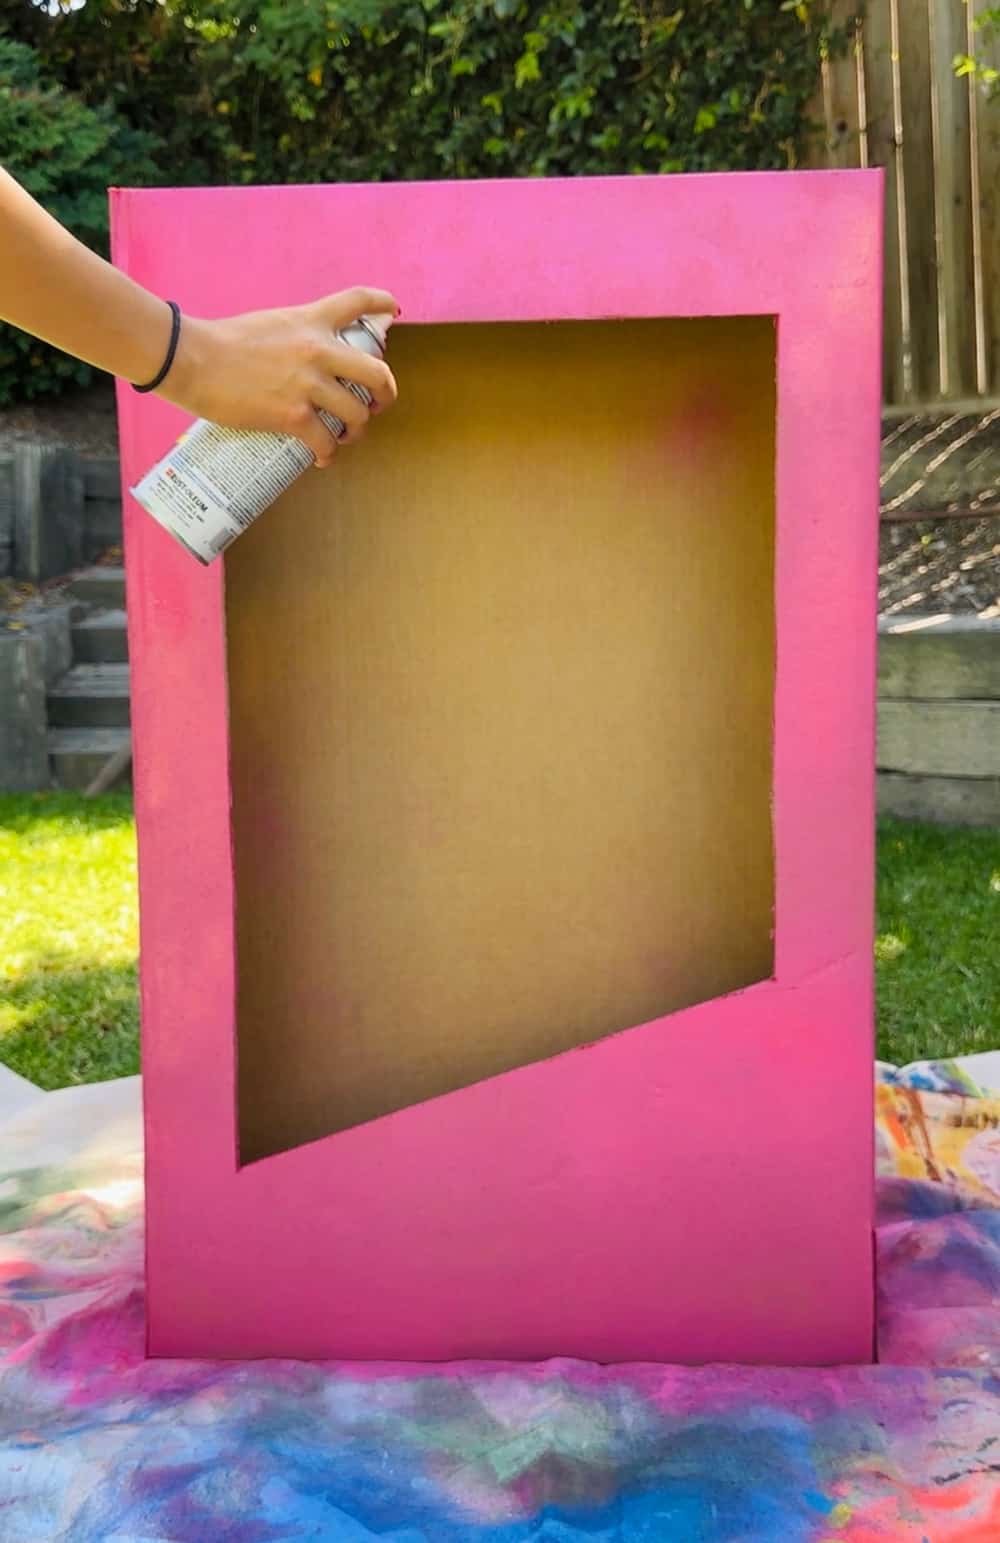 spray painting box pink for barbie costume